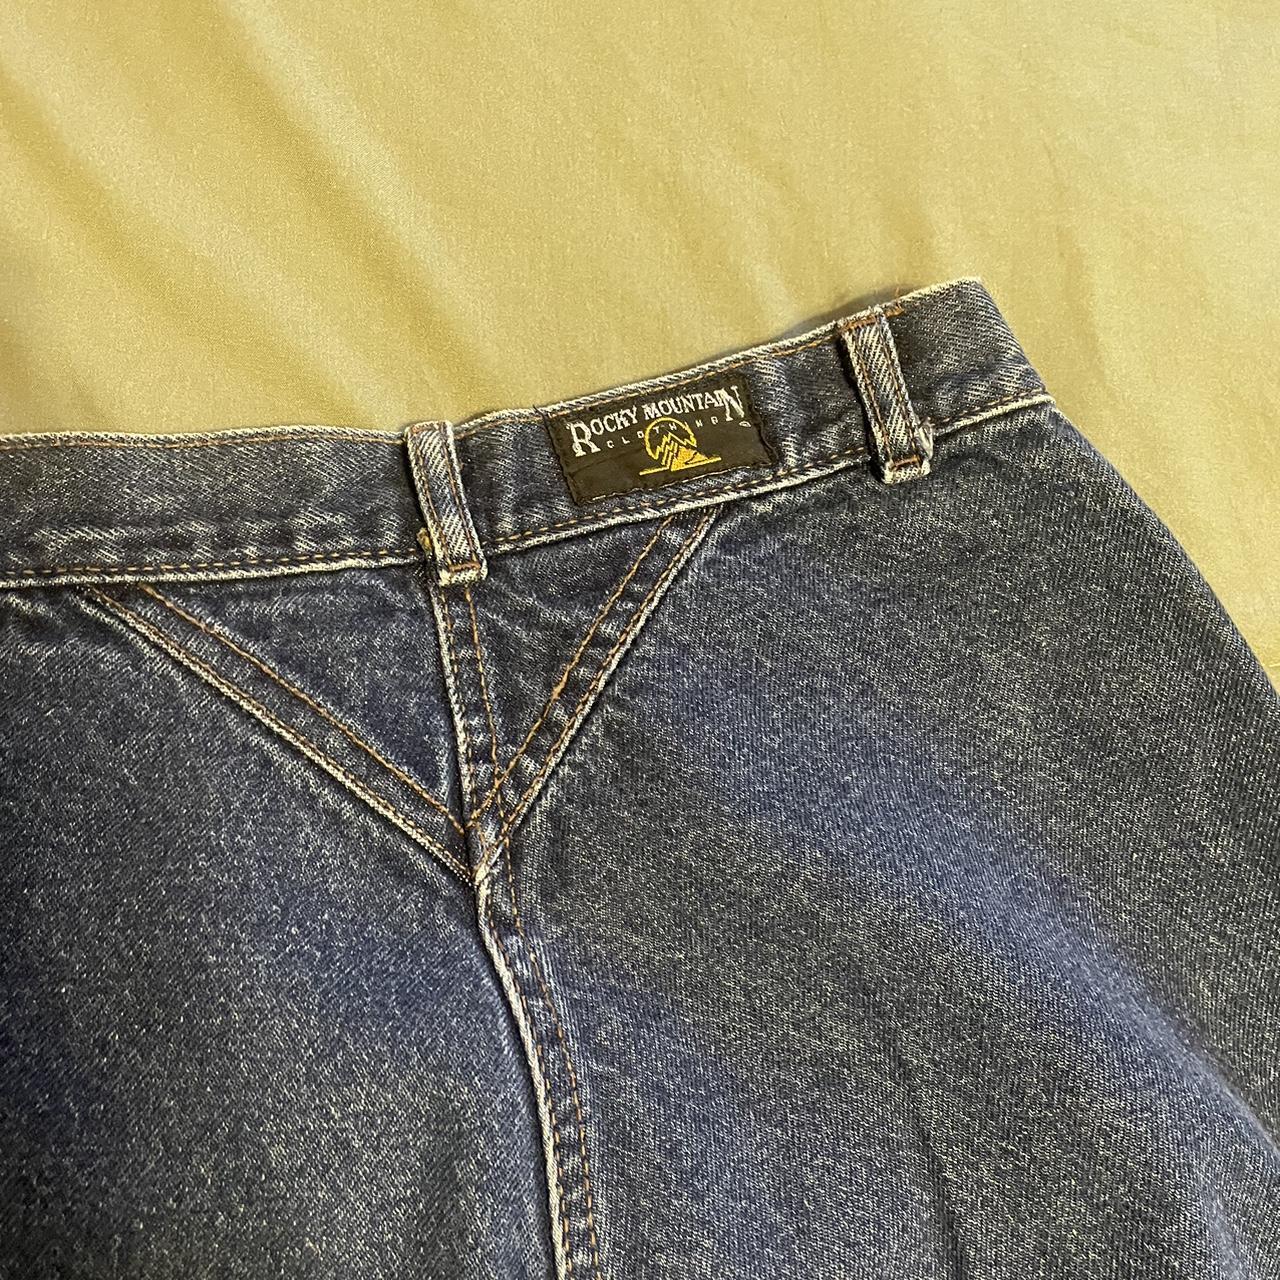 Rocky mountain jeans - size 30 but fit more like... - Depop